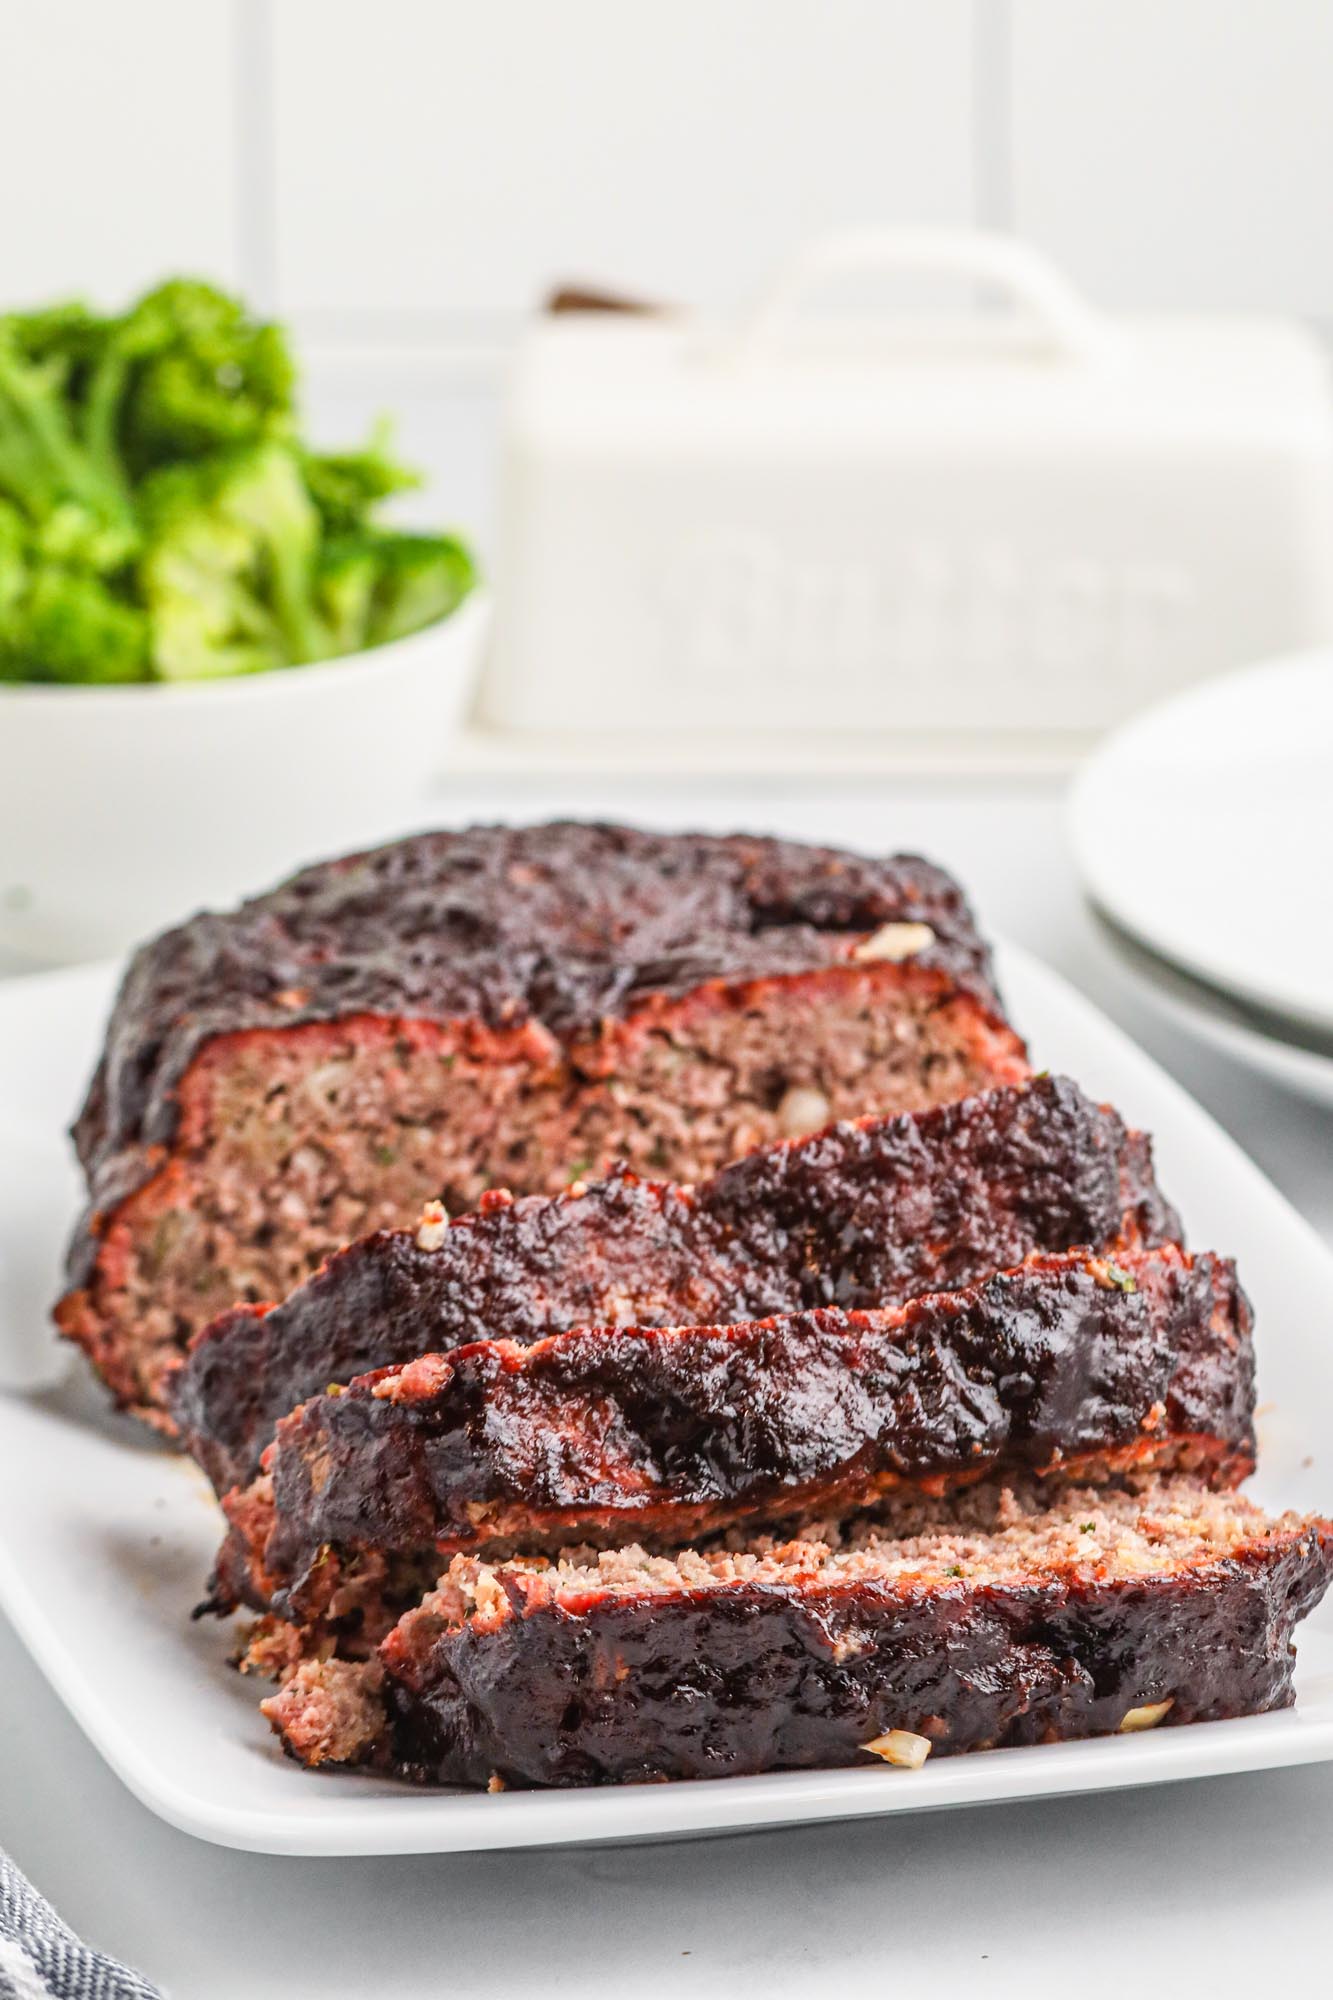 Sliced smoked meatloaf on a white plate